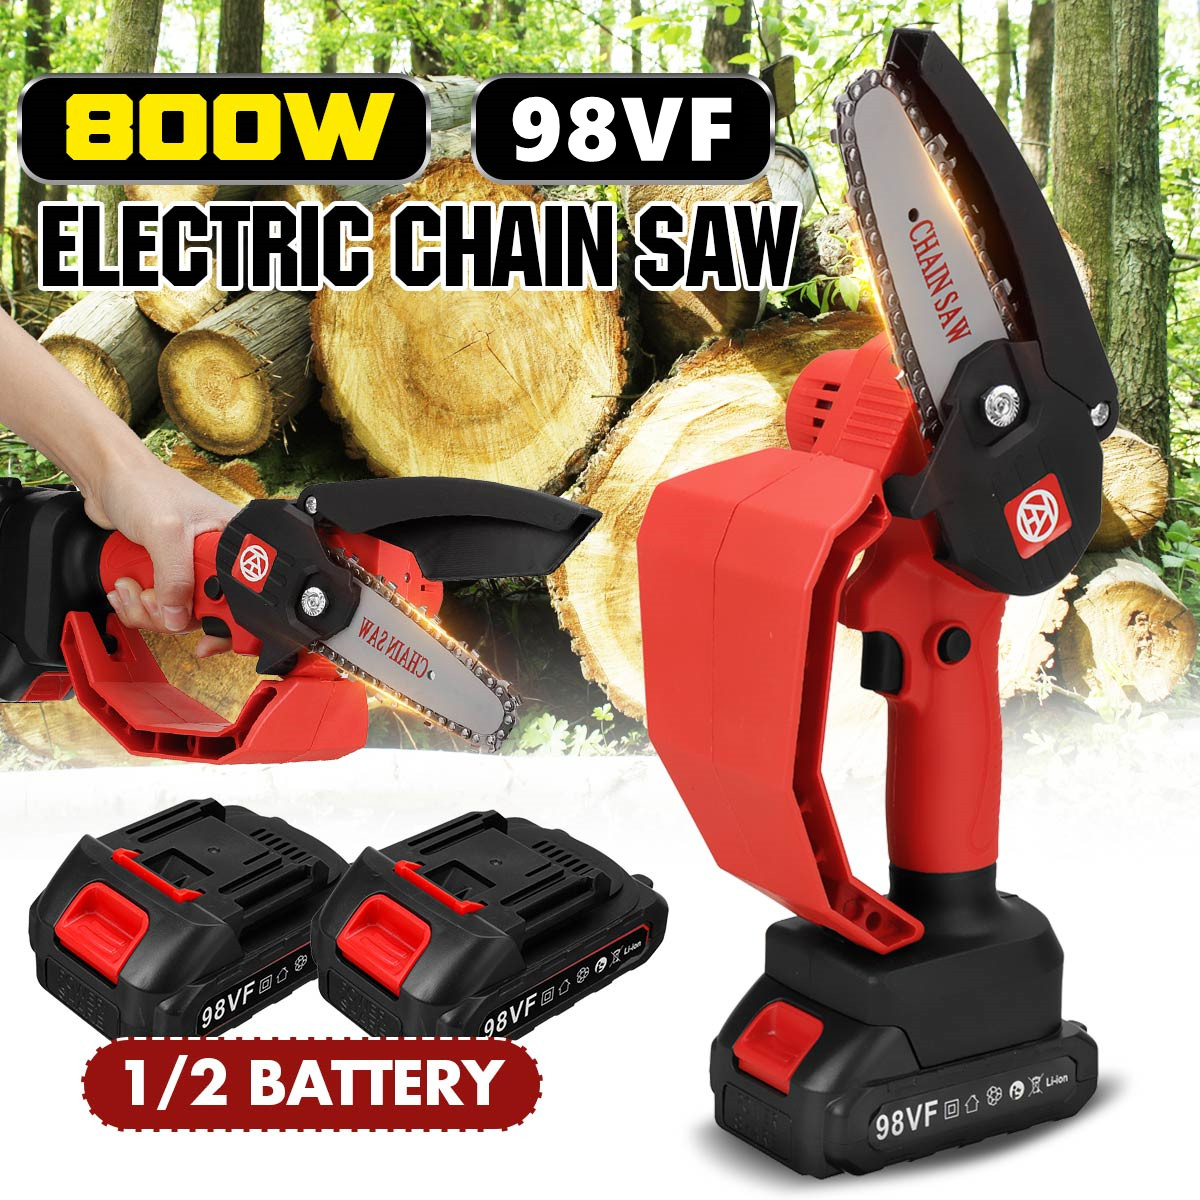 98VF-Electric-One-Hand-Saw-Chain-Saw-Woodworking-Belt-Hand-Guard-Kit-1854549-1